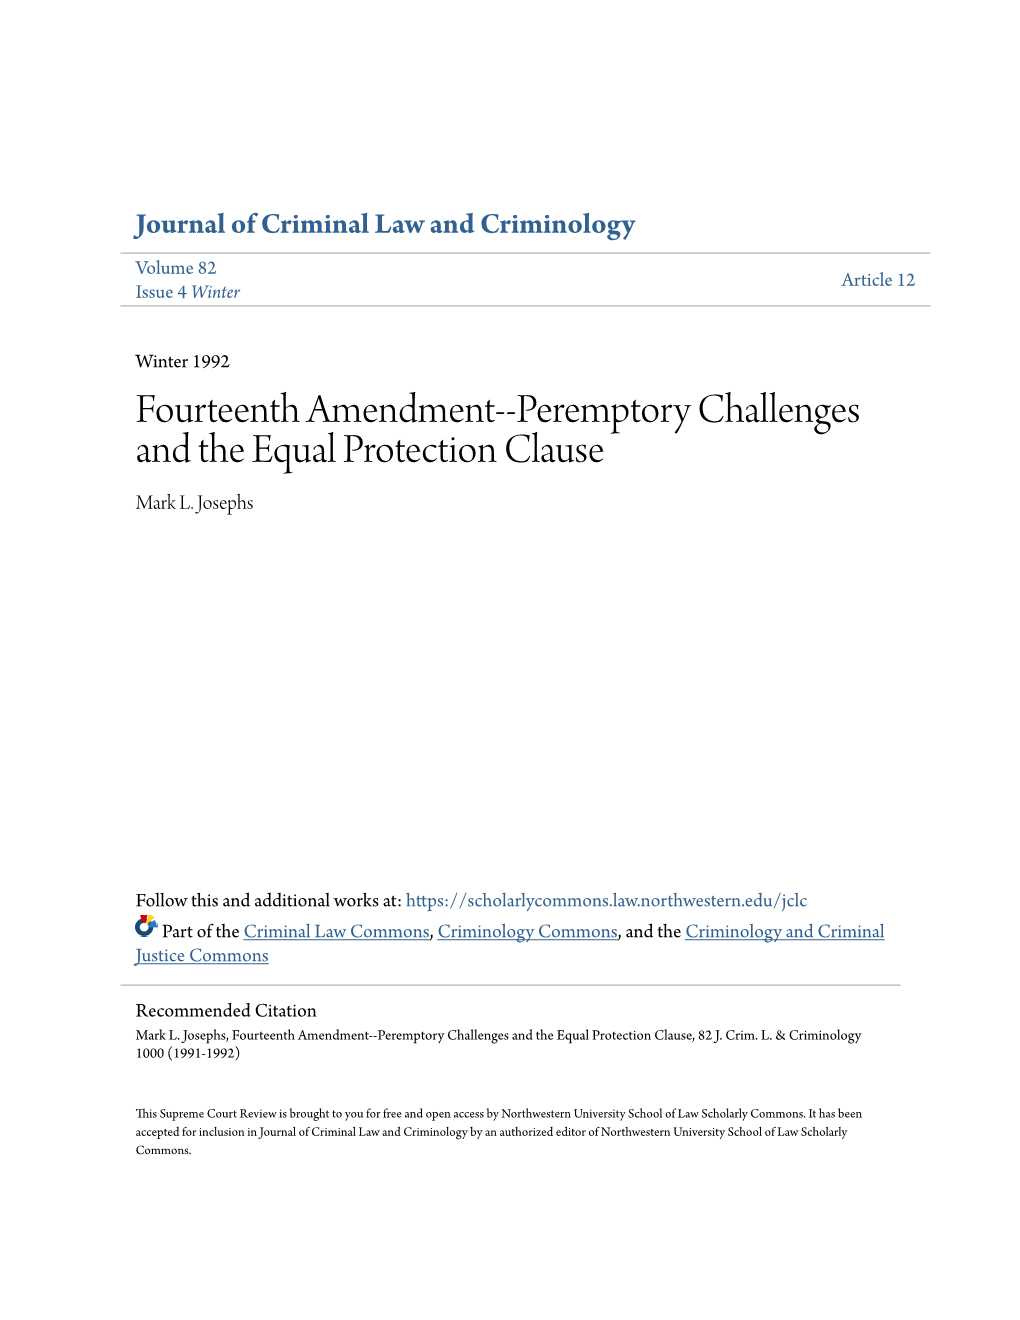 Peremptory Challenges and the Equal Protection Clause Mark L